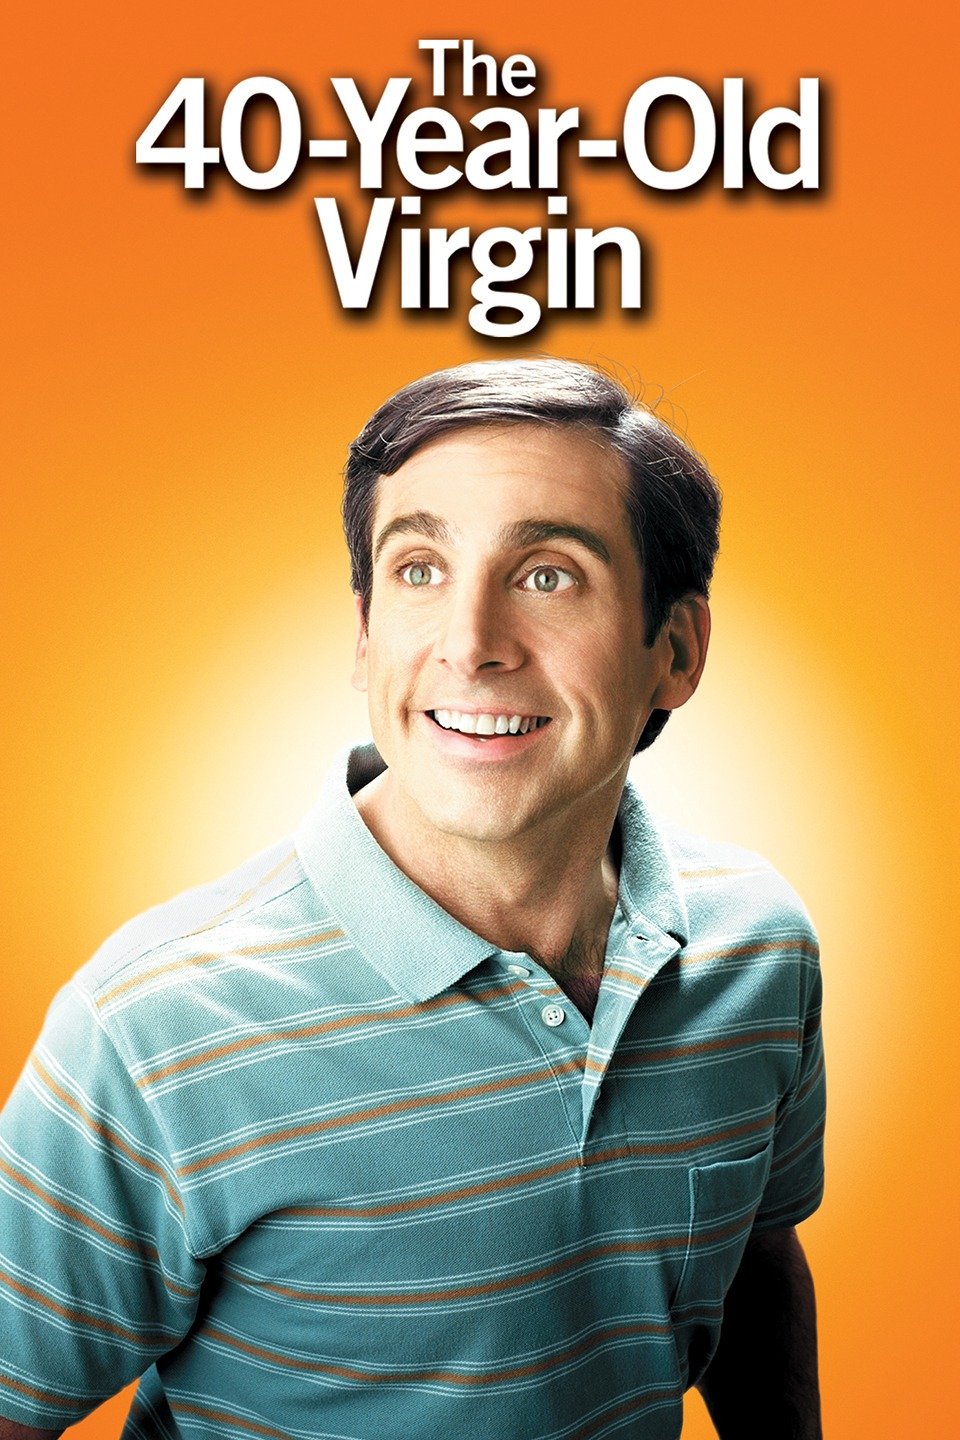 The 40-Year-Old Virgin image image